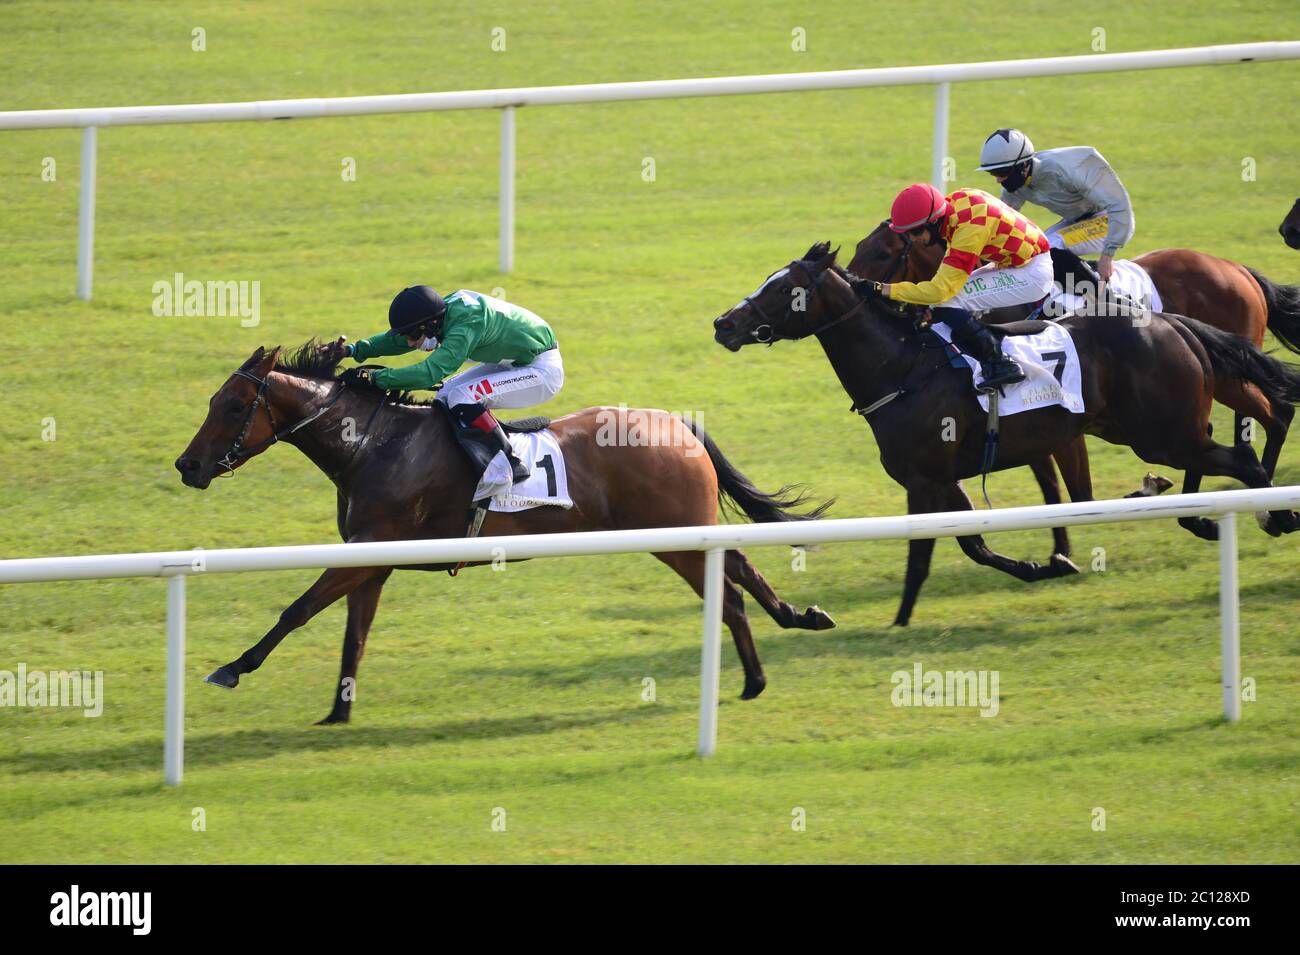 Strong Johnson ridden by Colin Keane (left) wins the Platinum Bloodstock & Eyrefield Handicap at Curragh Racecourse. Stock Photo